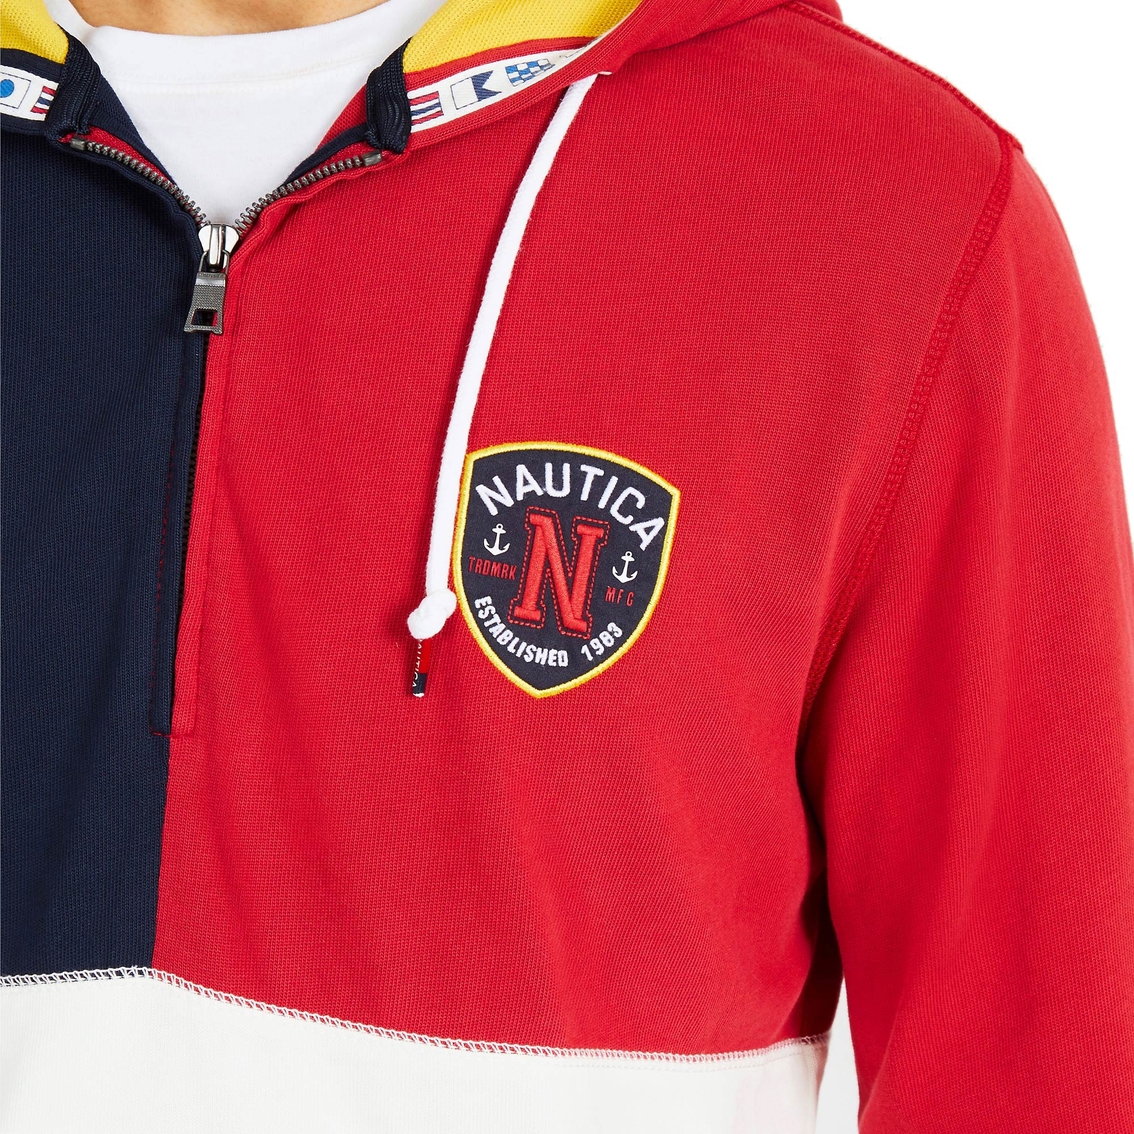 Nautica Fashion Blocked Pullover Hoodie - Image 4 of 4